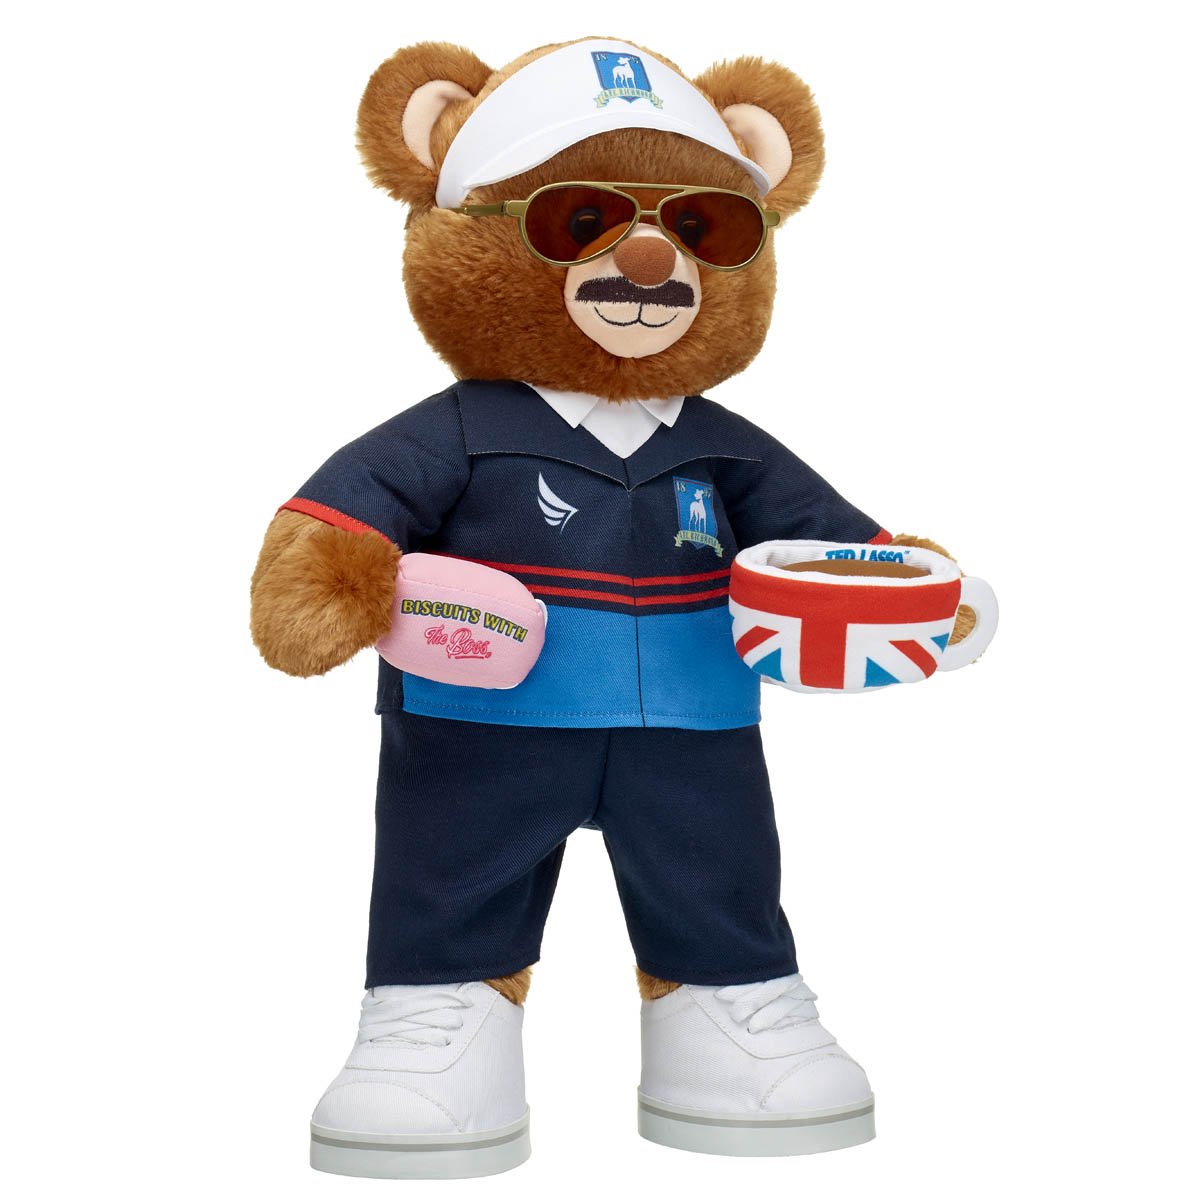 Build-A-Bear's Ted Lasso Plush doll with Biscuits with the boss box and Union Jack tea cup standing